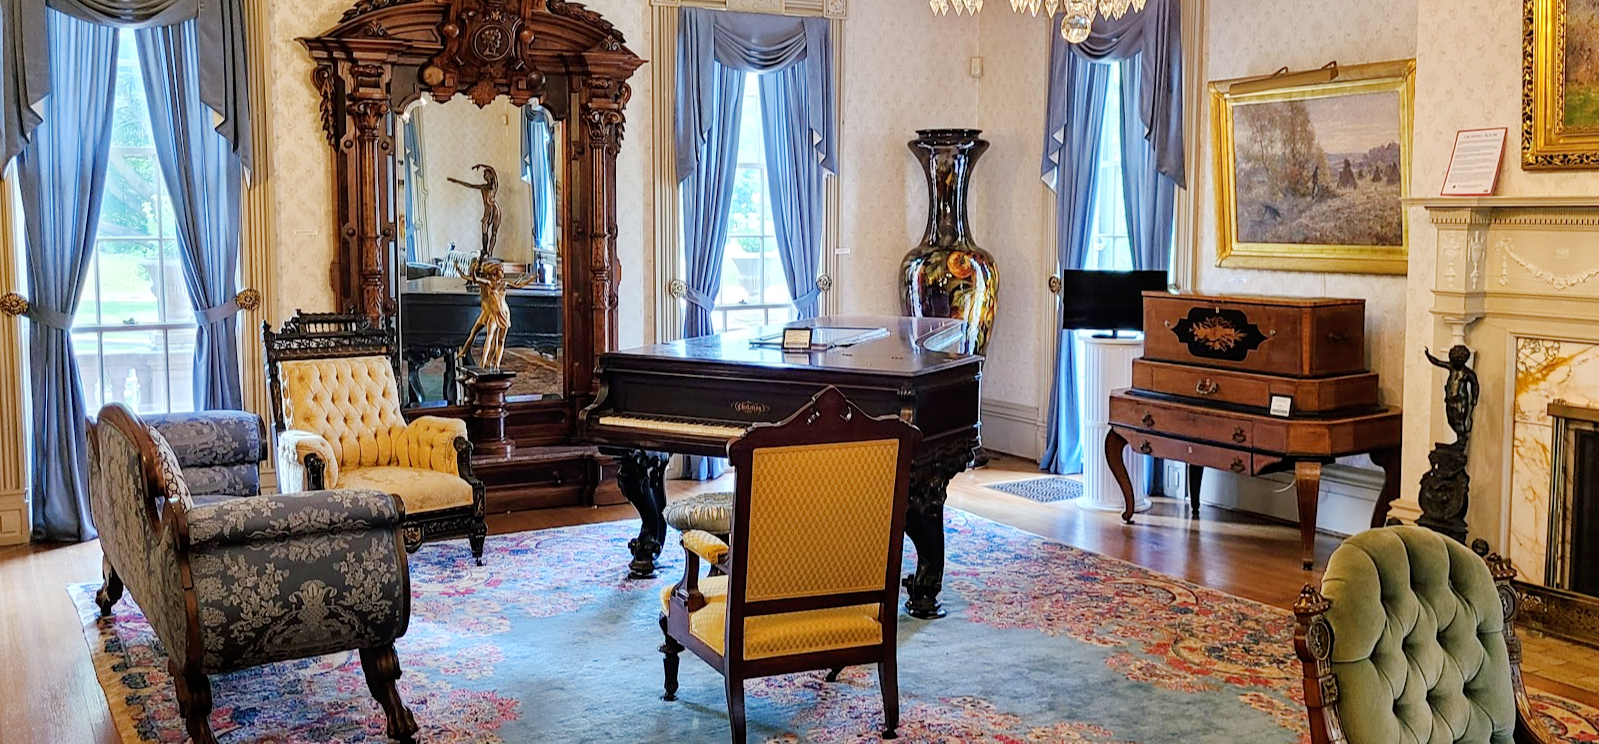 Drawing Room at the Haan Museum of Indiana Art - formal room with ornate furniture, including a grand piano